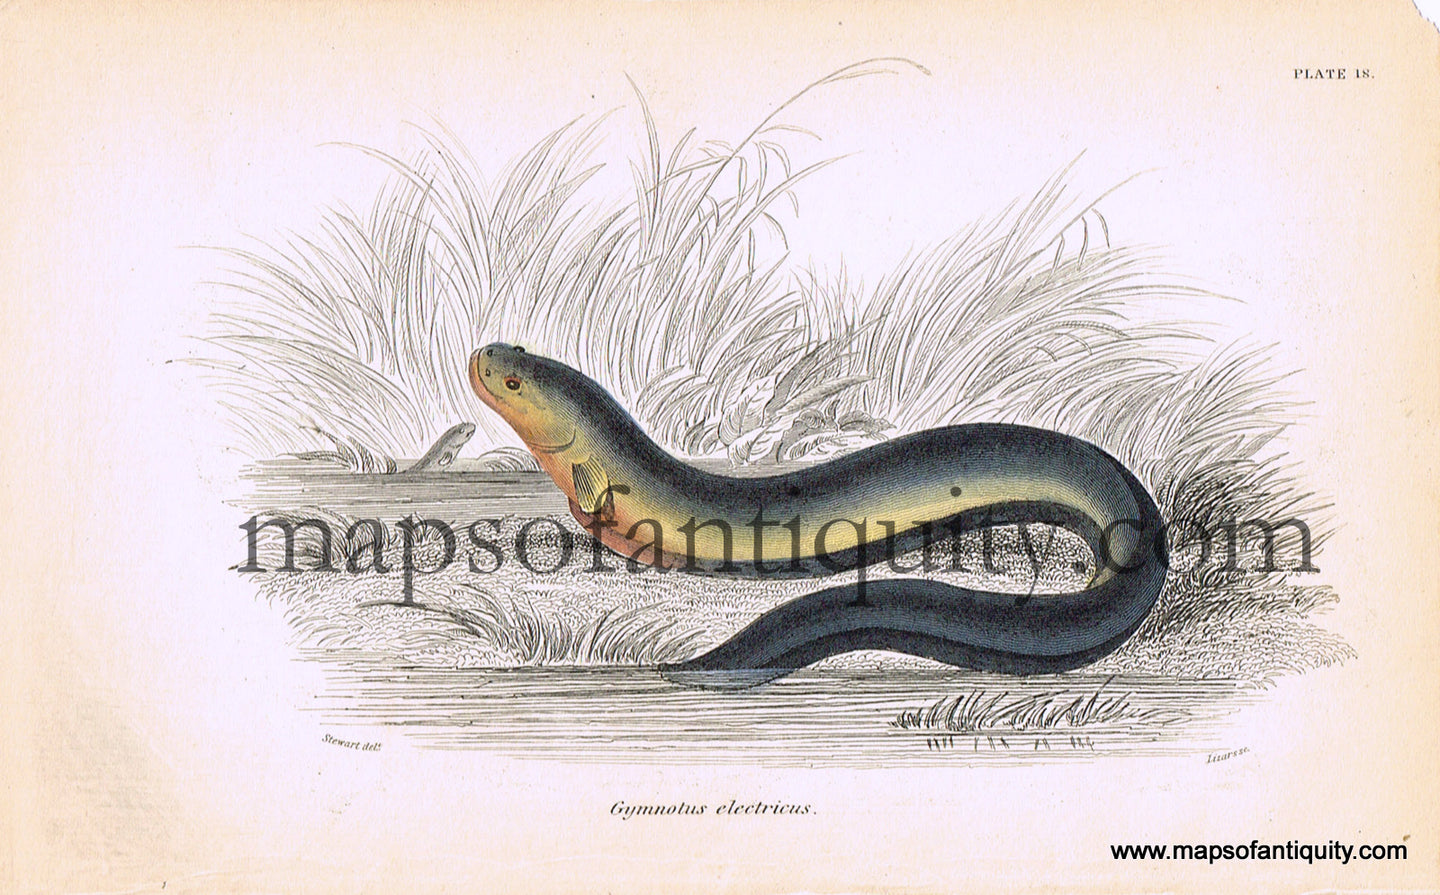 Antique-Hand-Colored-Engraved-Illustration-Gymnotus-electricus-Natural-History-Prints-Fish-1834-Jardine-Maps-Of-Antiquity